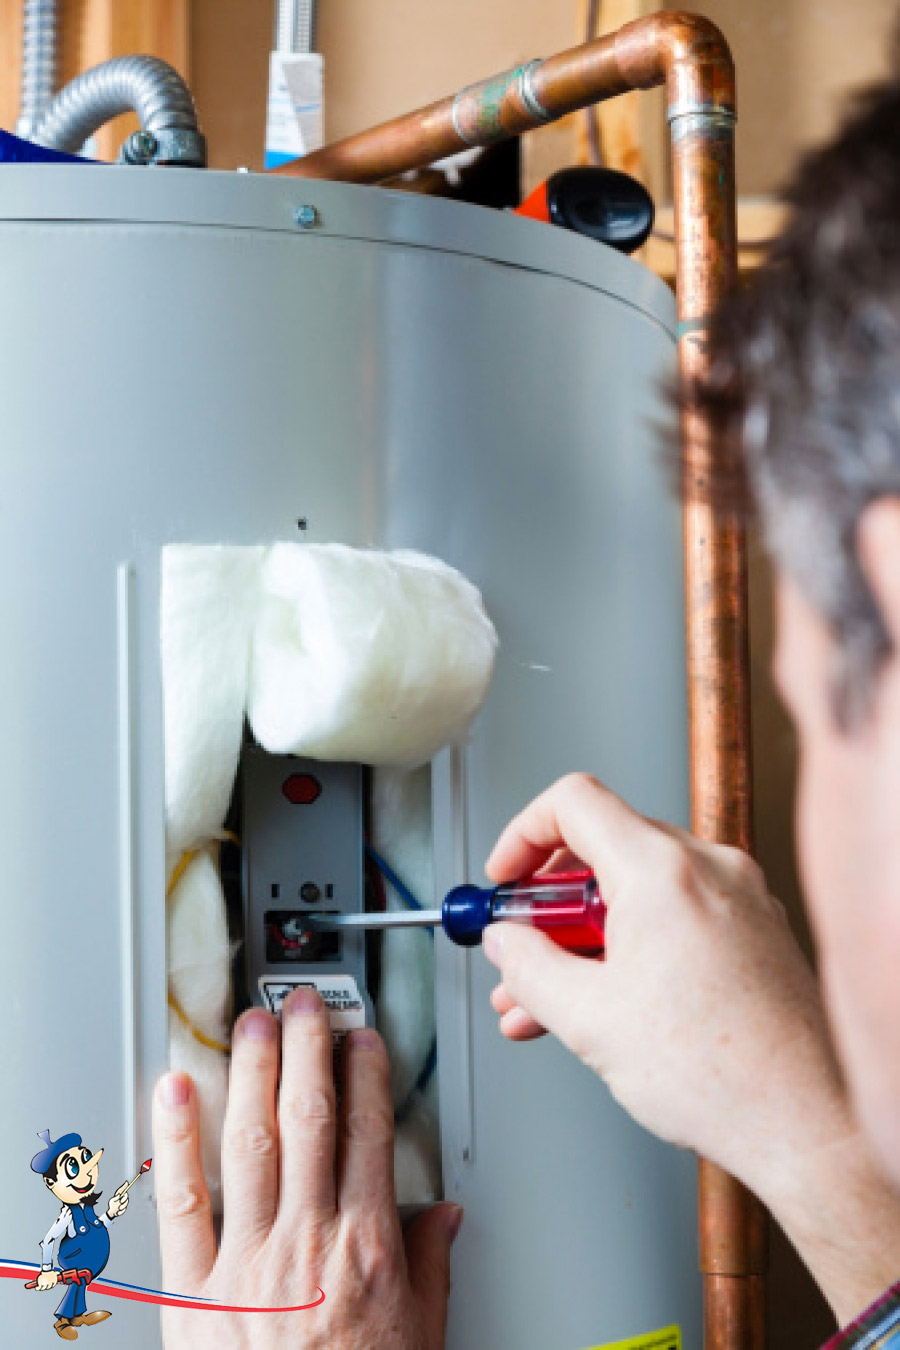 How to adjust the temperature of your water heater - CNET